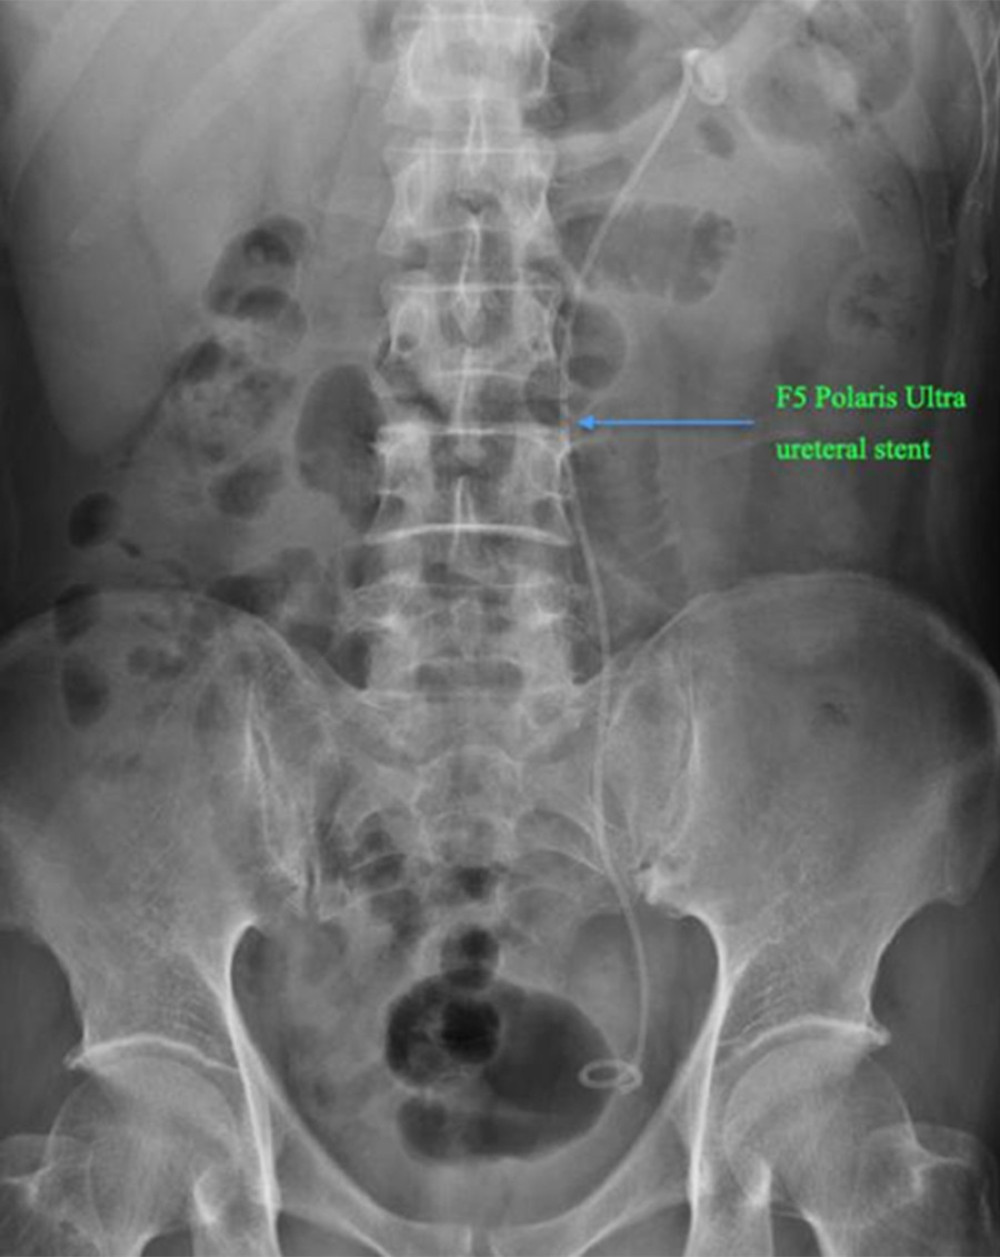 An X-ray of patient 1 showing that an f5 Polaris Ultra ureteral stent (as labeled) remained in place post-operation.